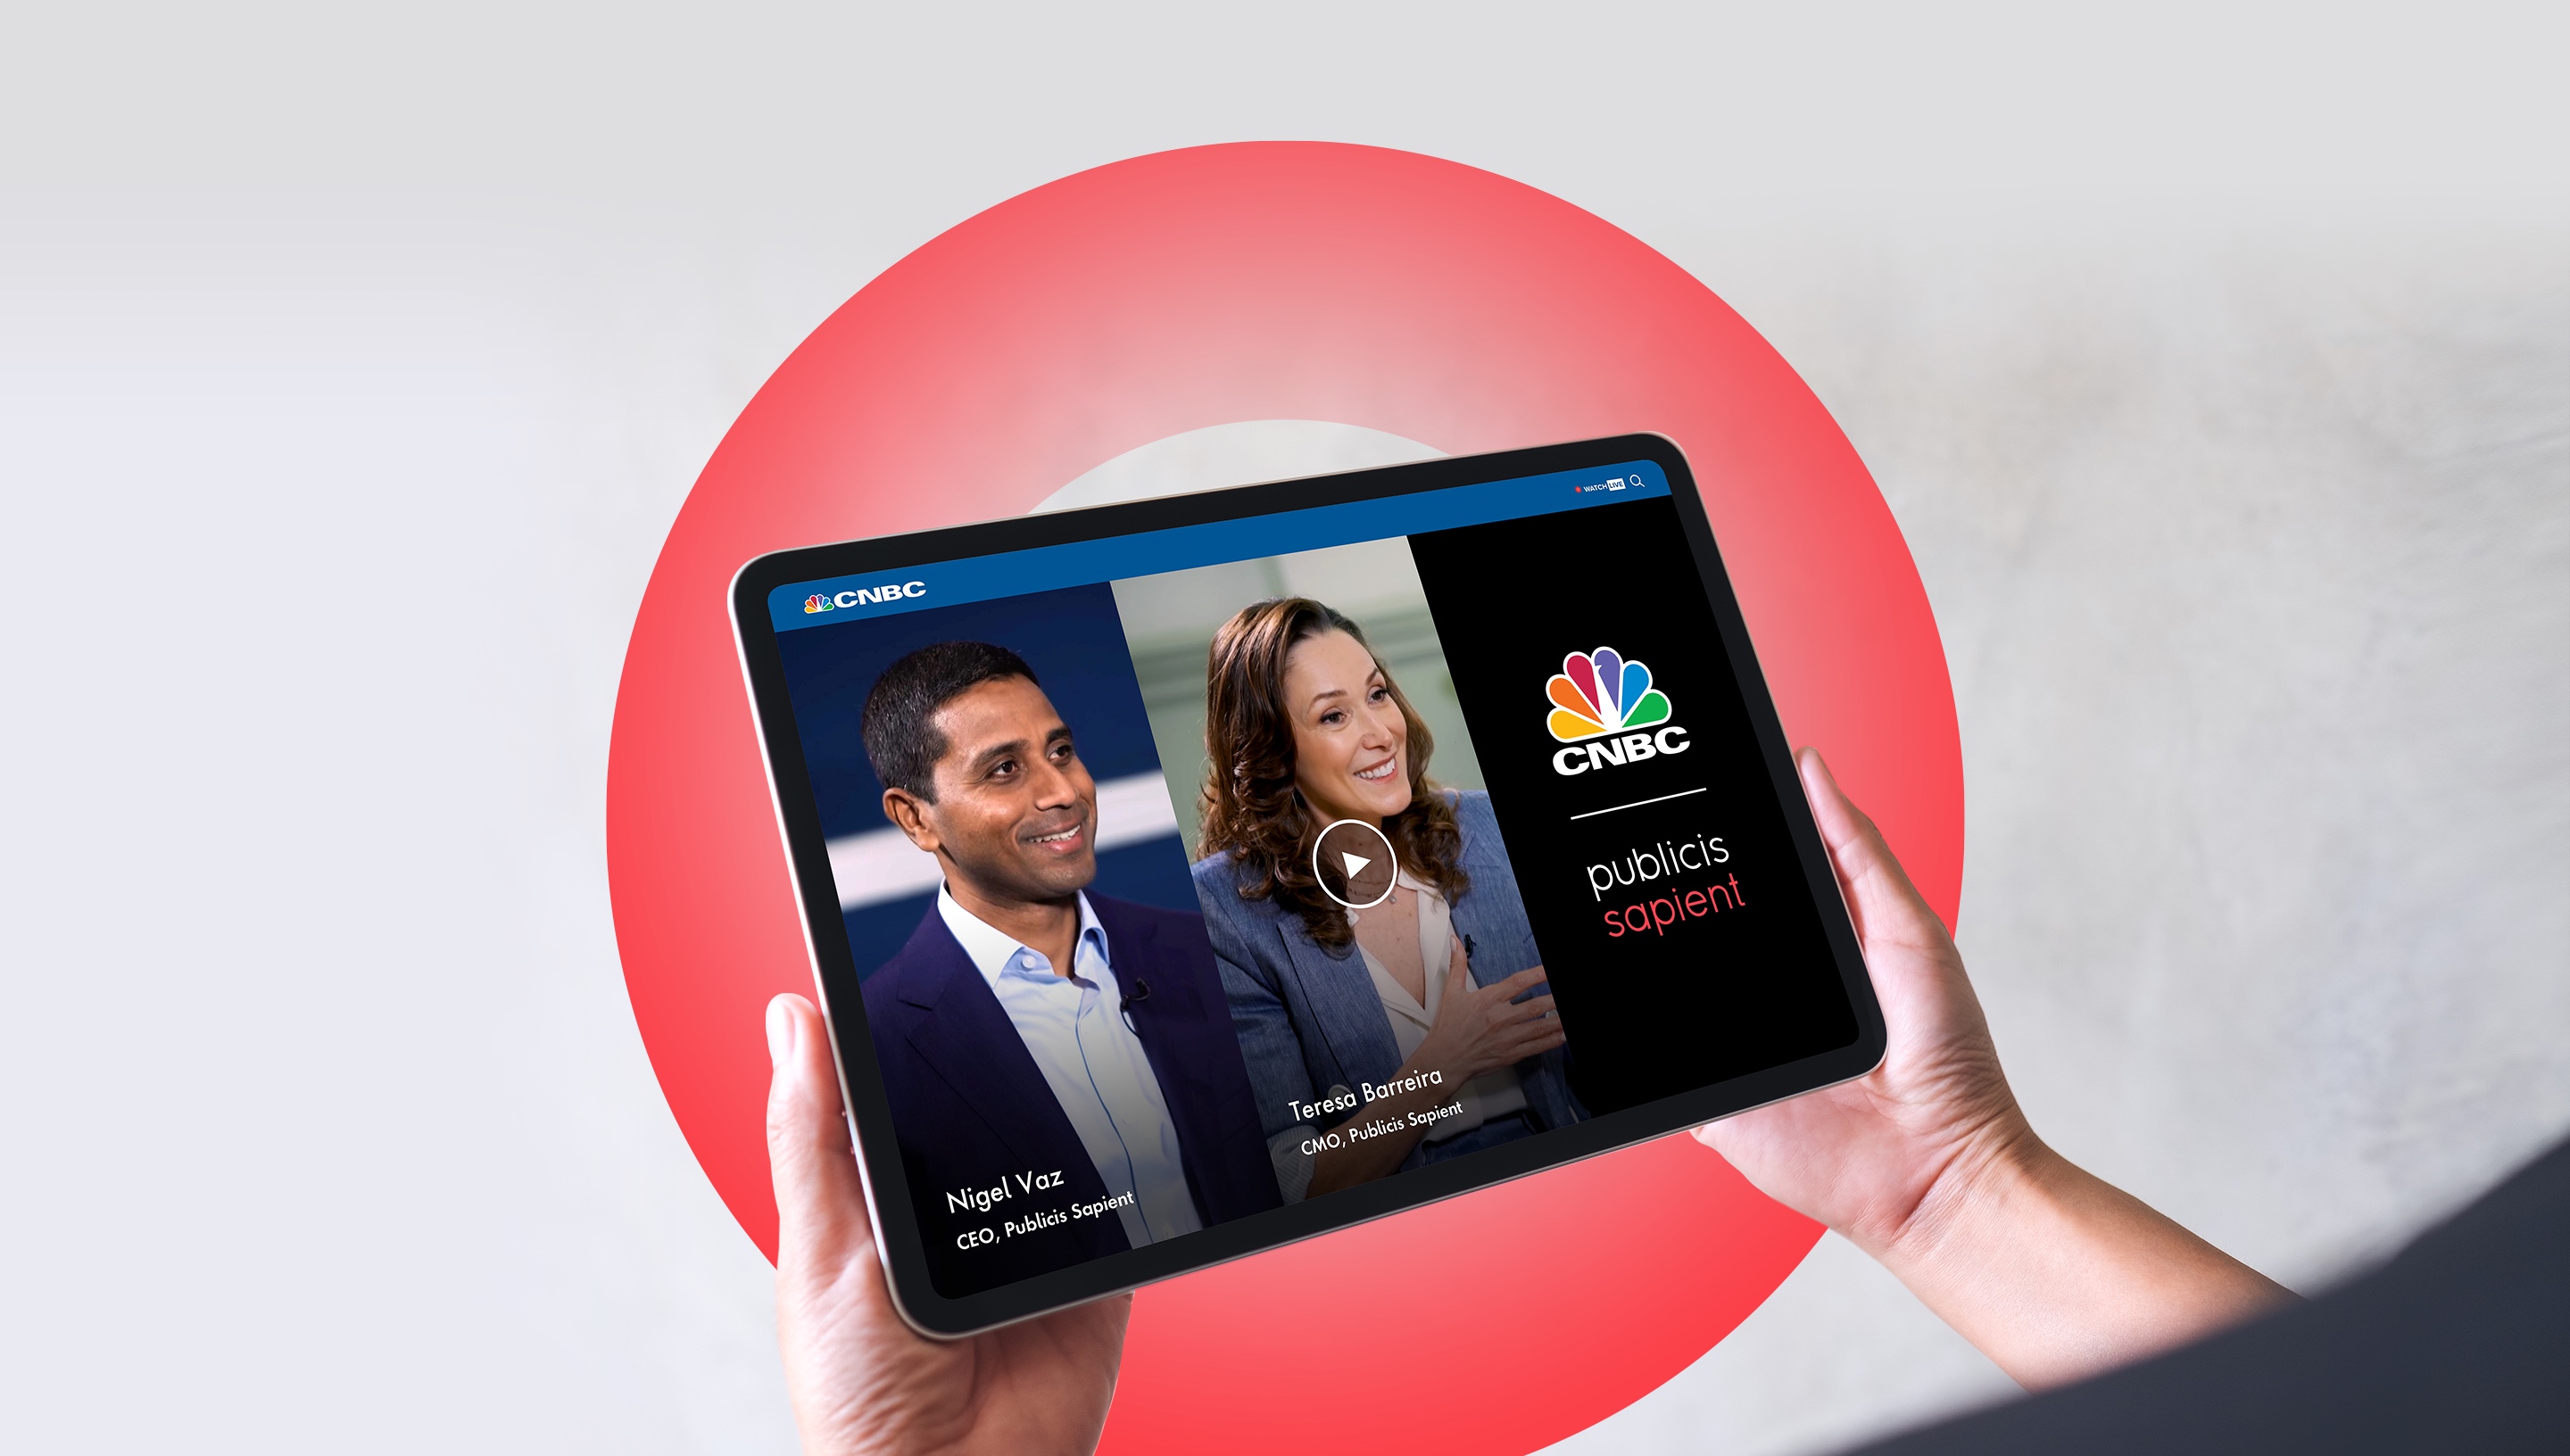 A person holding a tablet that shows a split video screen. CEO Nigel Vaz is on the left and logos for CNBC and Publicis Sapient are on the right.